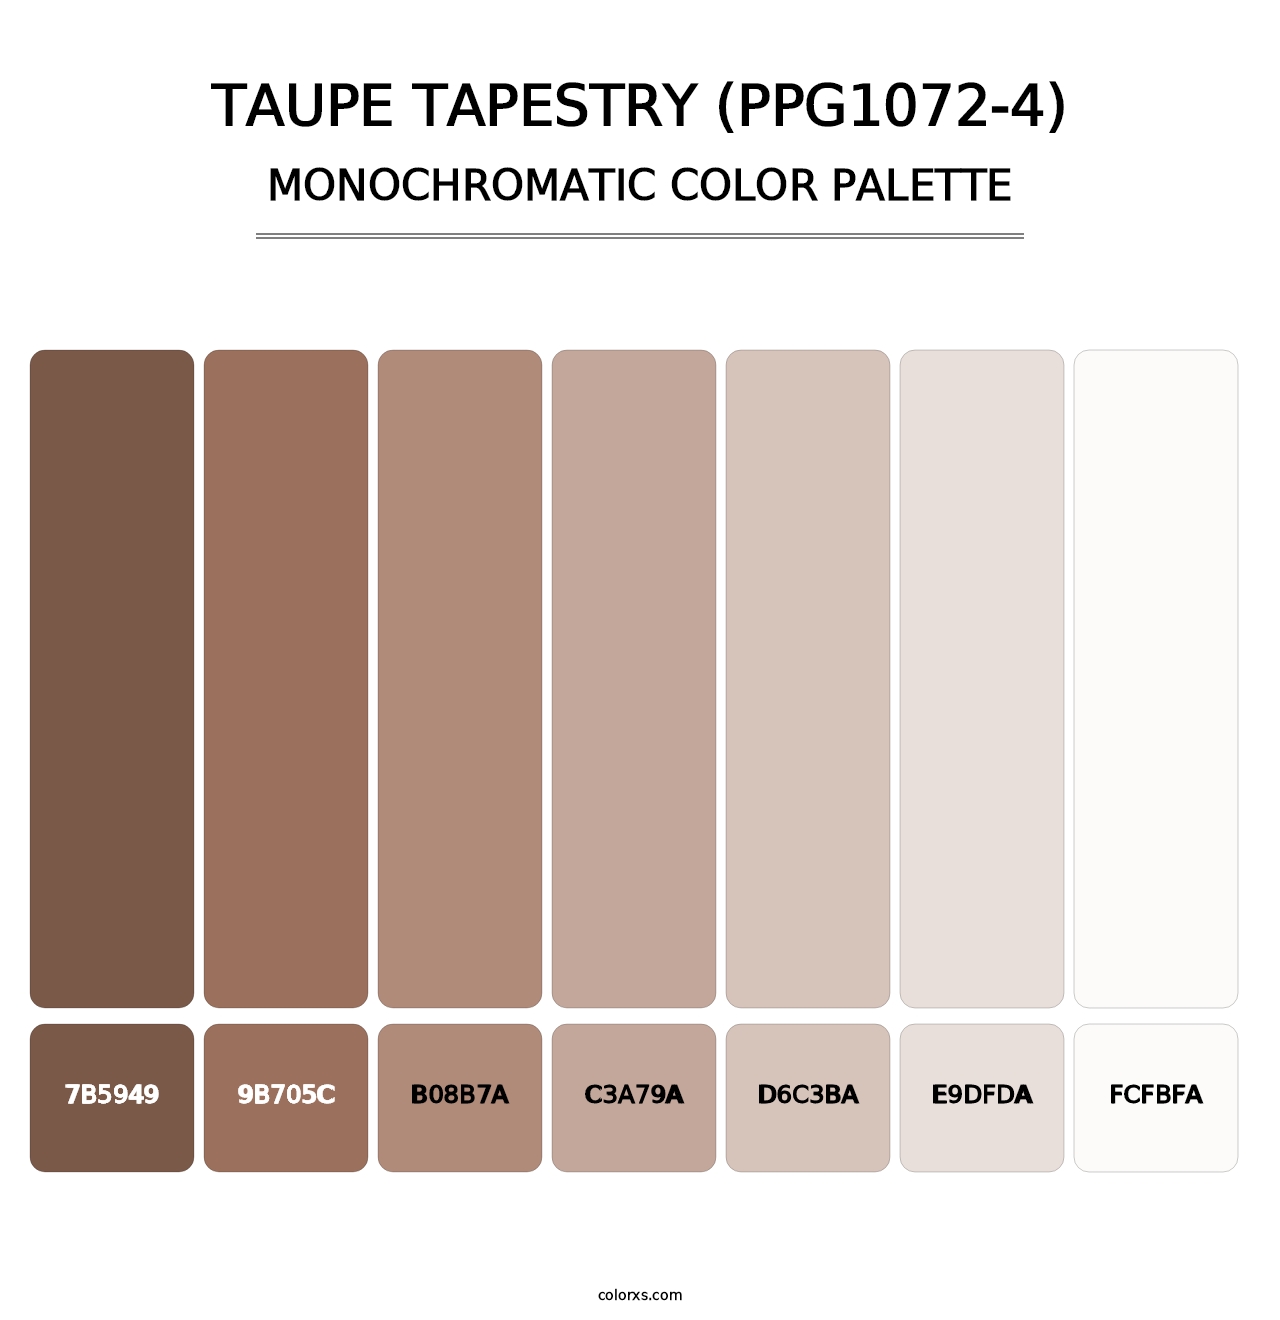 Taupe Tapestry (PPG1072-4) - Monochromatic Color Palette